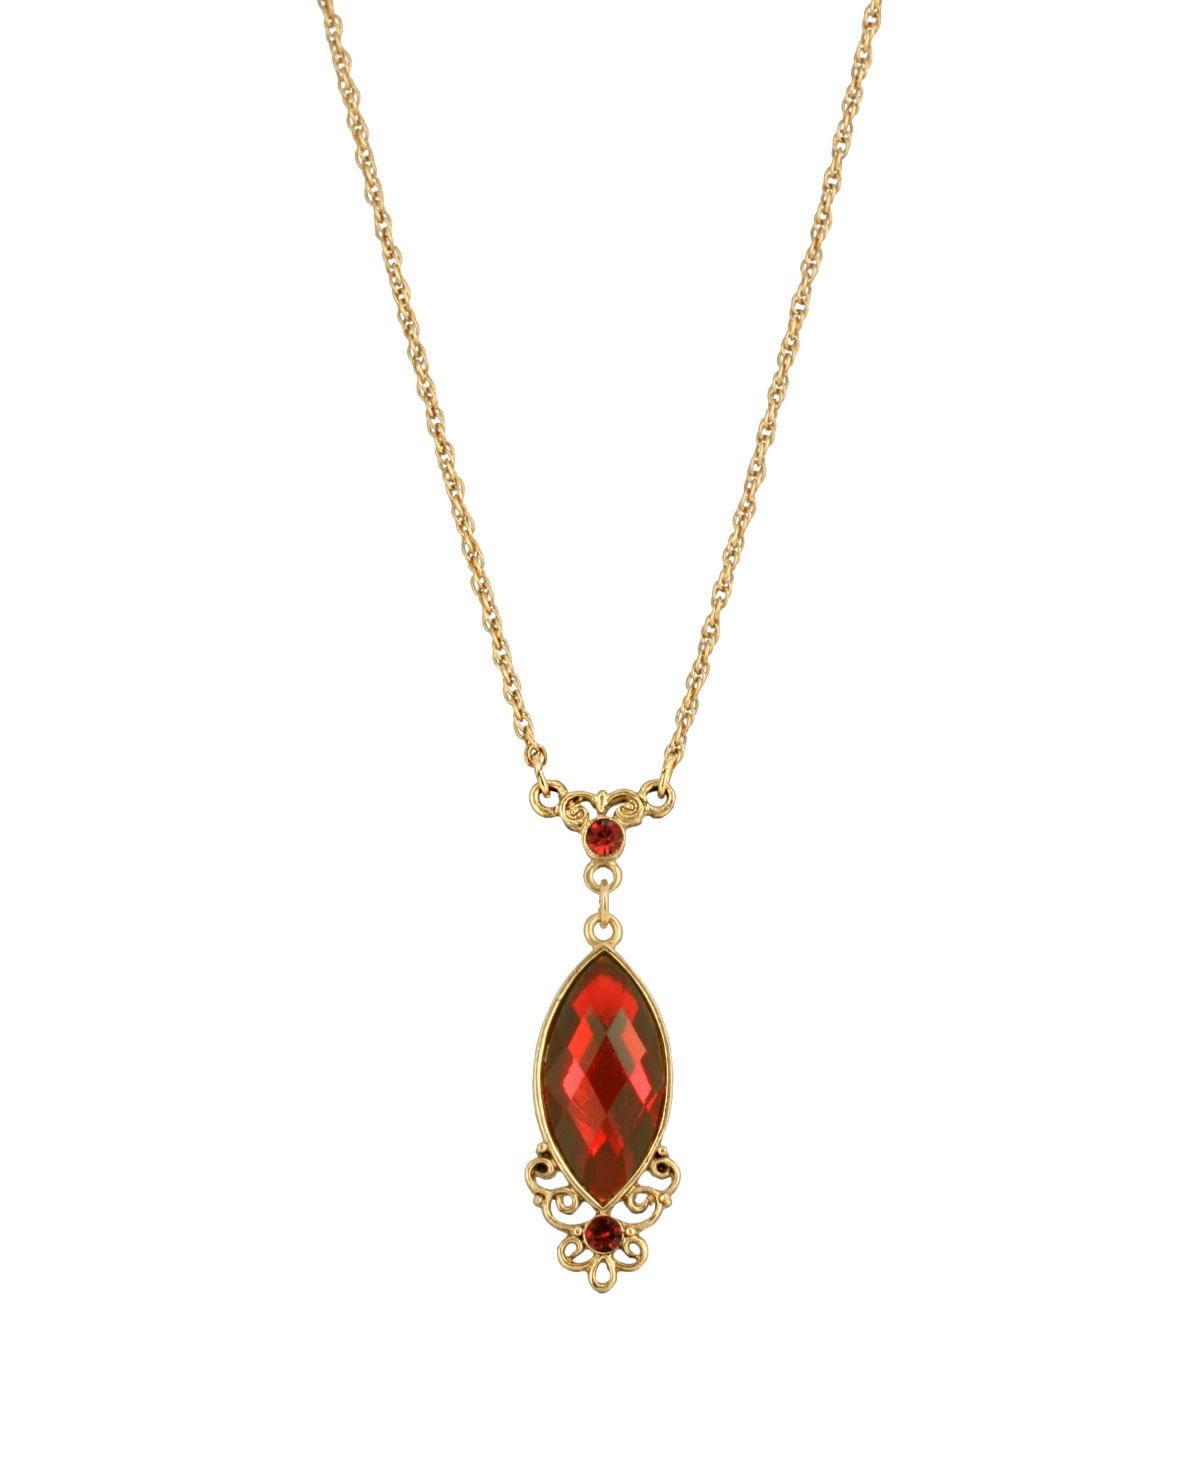 2028 Women's Gold Tone Red Filigree Pendant Necklace